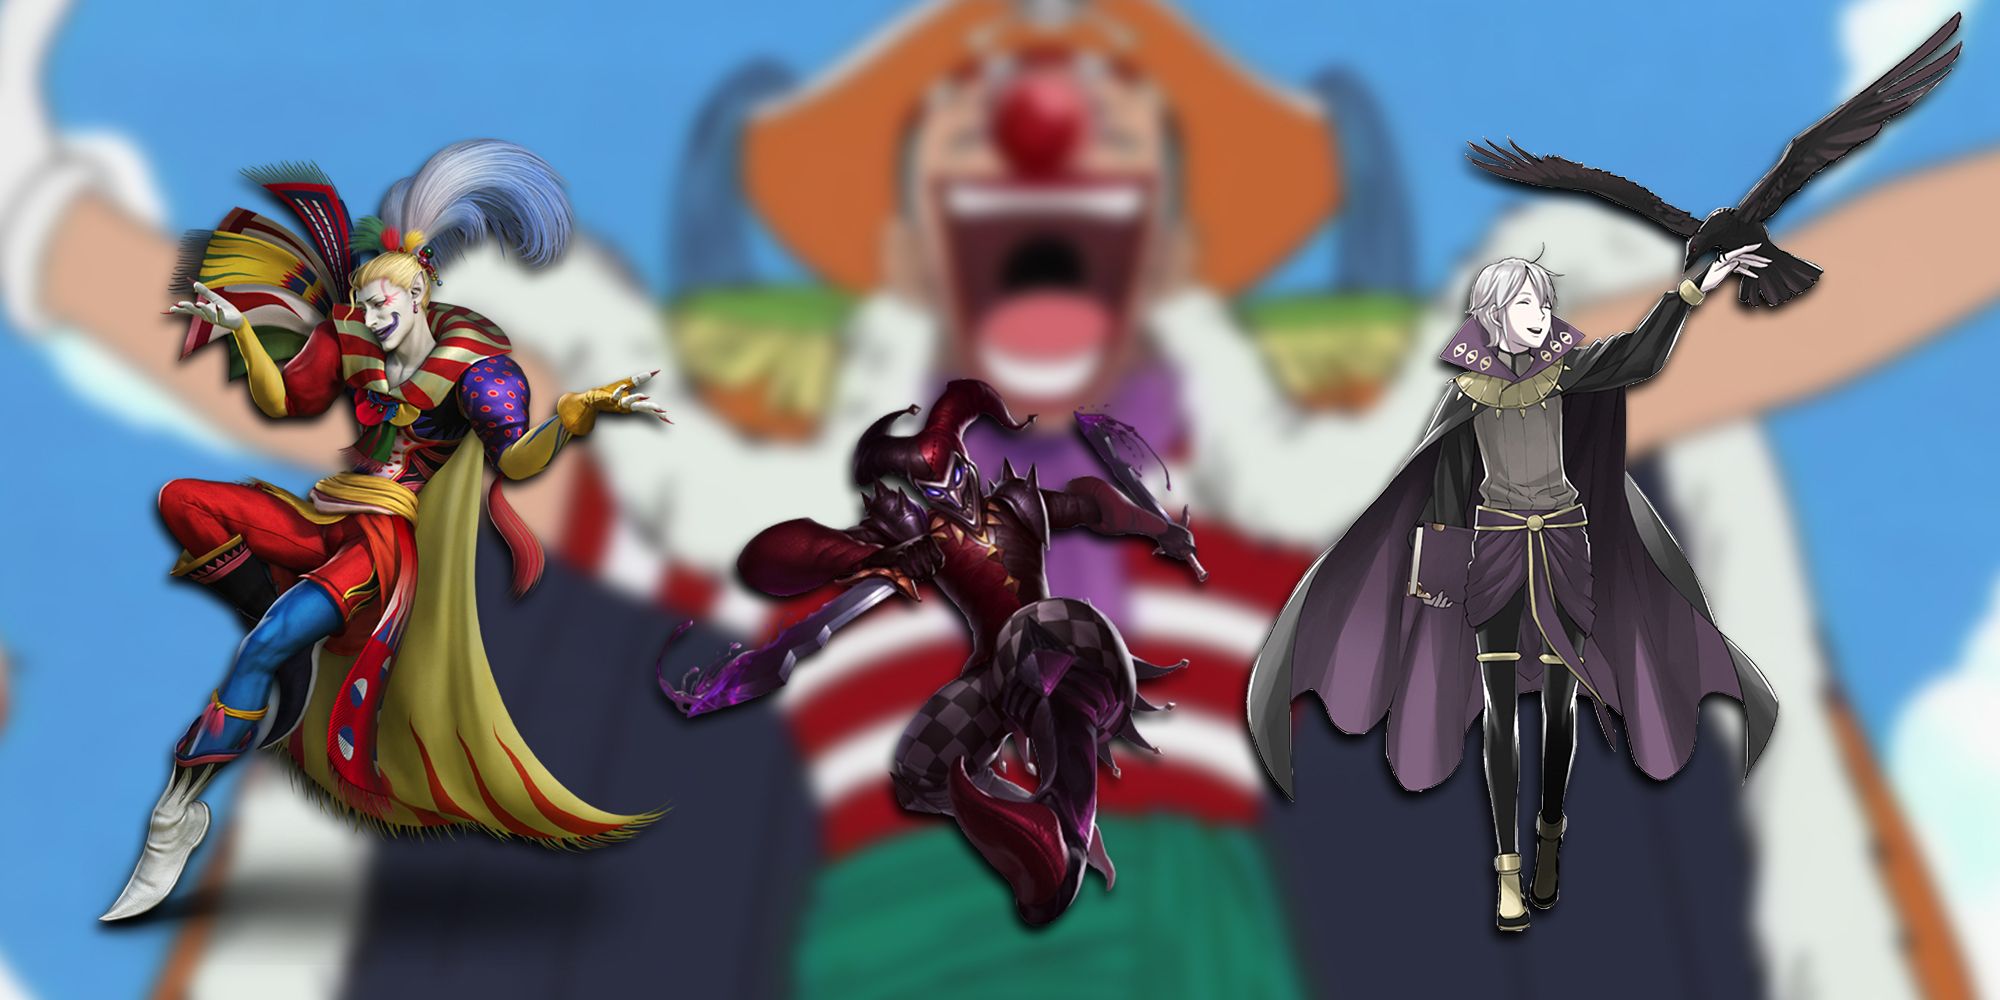 Three Examples Of Chaotic Joker-type Characters Across Both Video Games and Anime